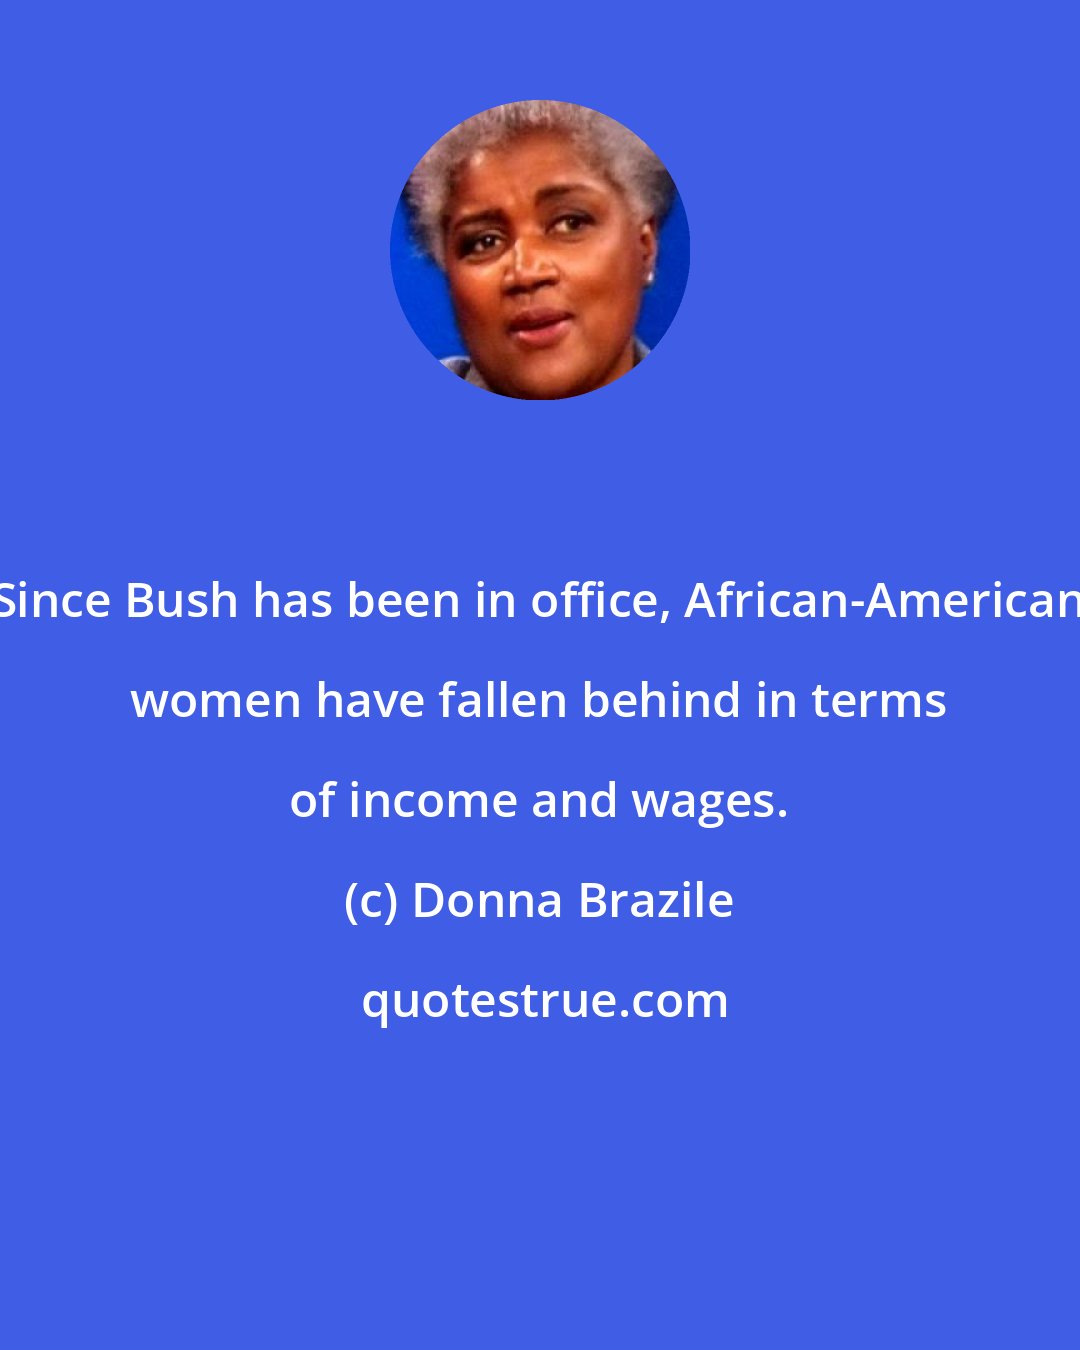 Donna Brazile: Since Bush has been in office, African-American women have fallen behind in terms of income and wages.